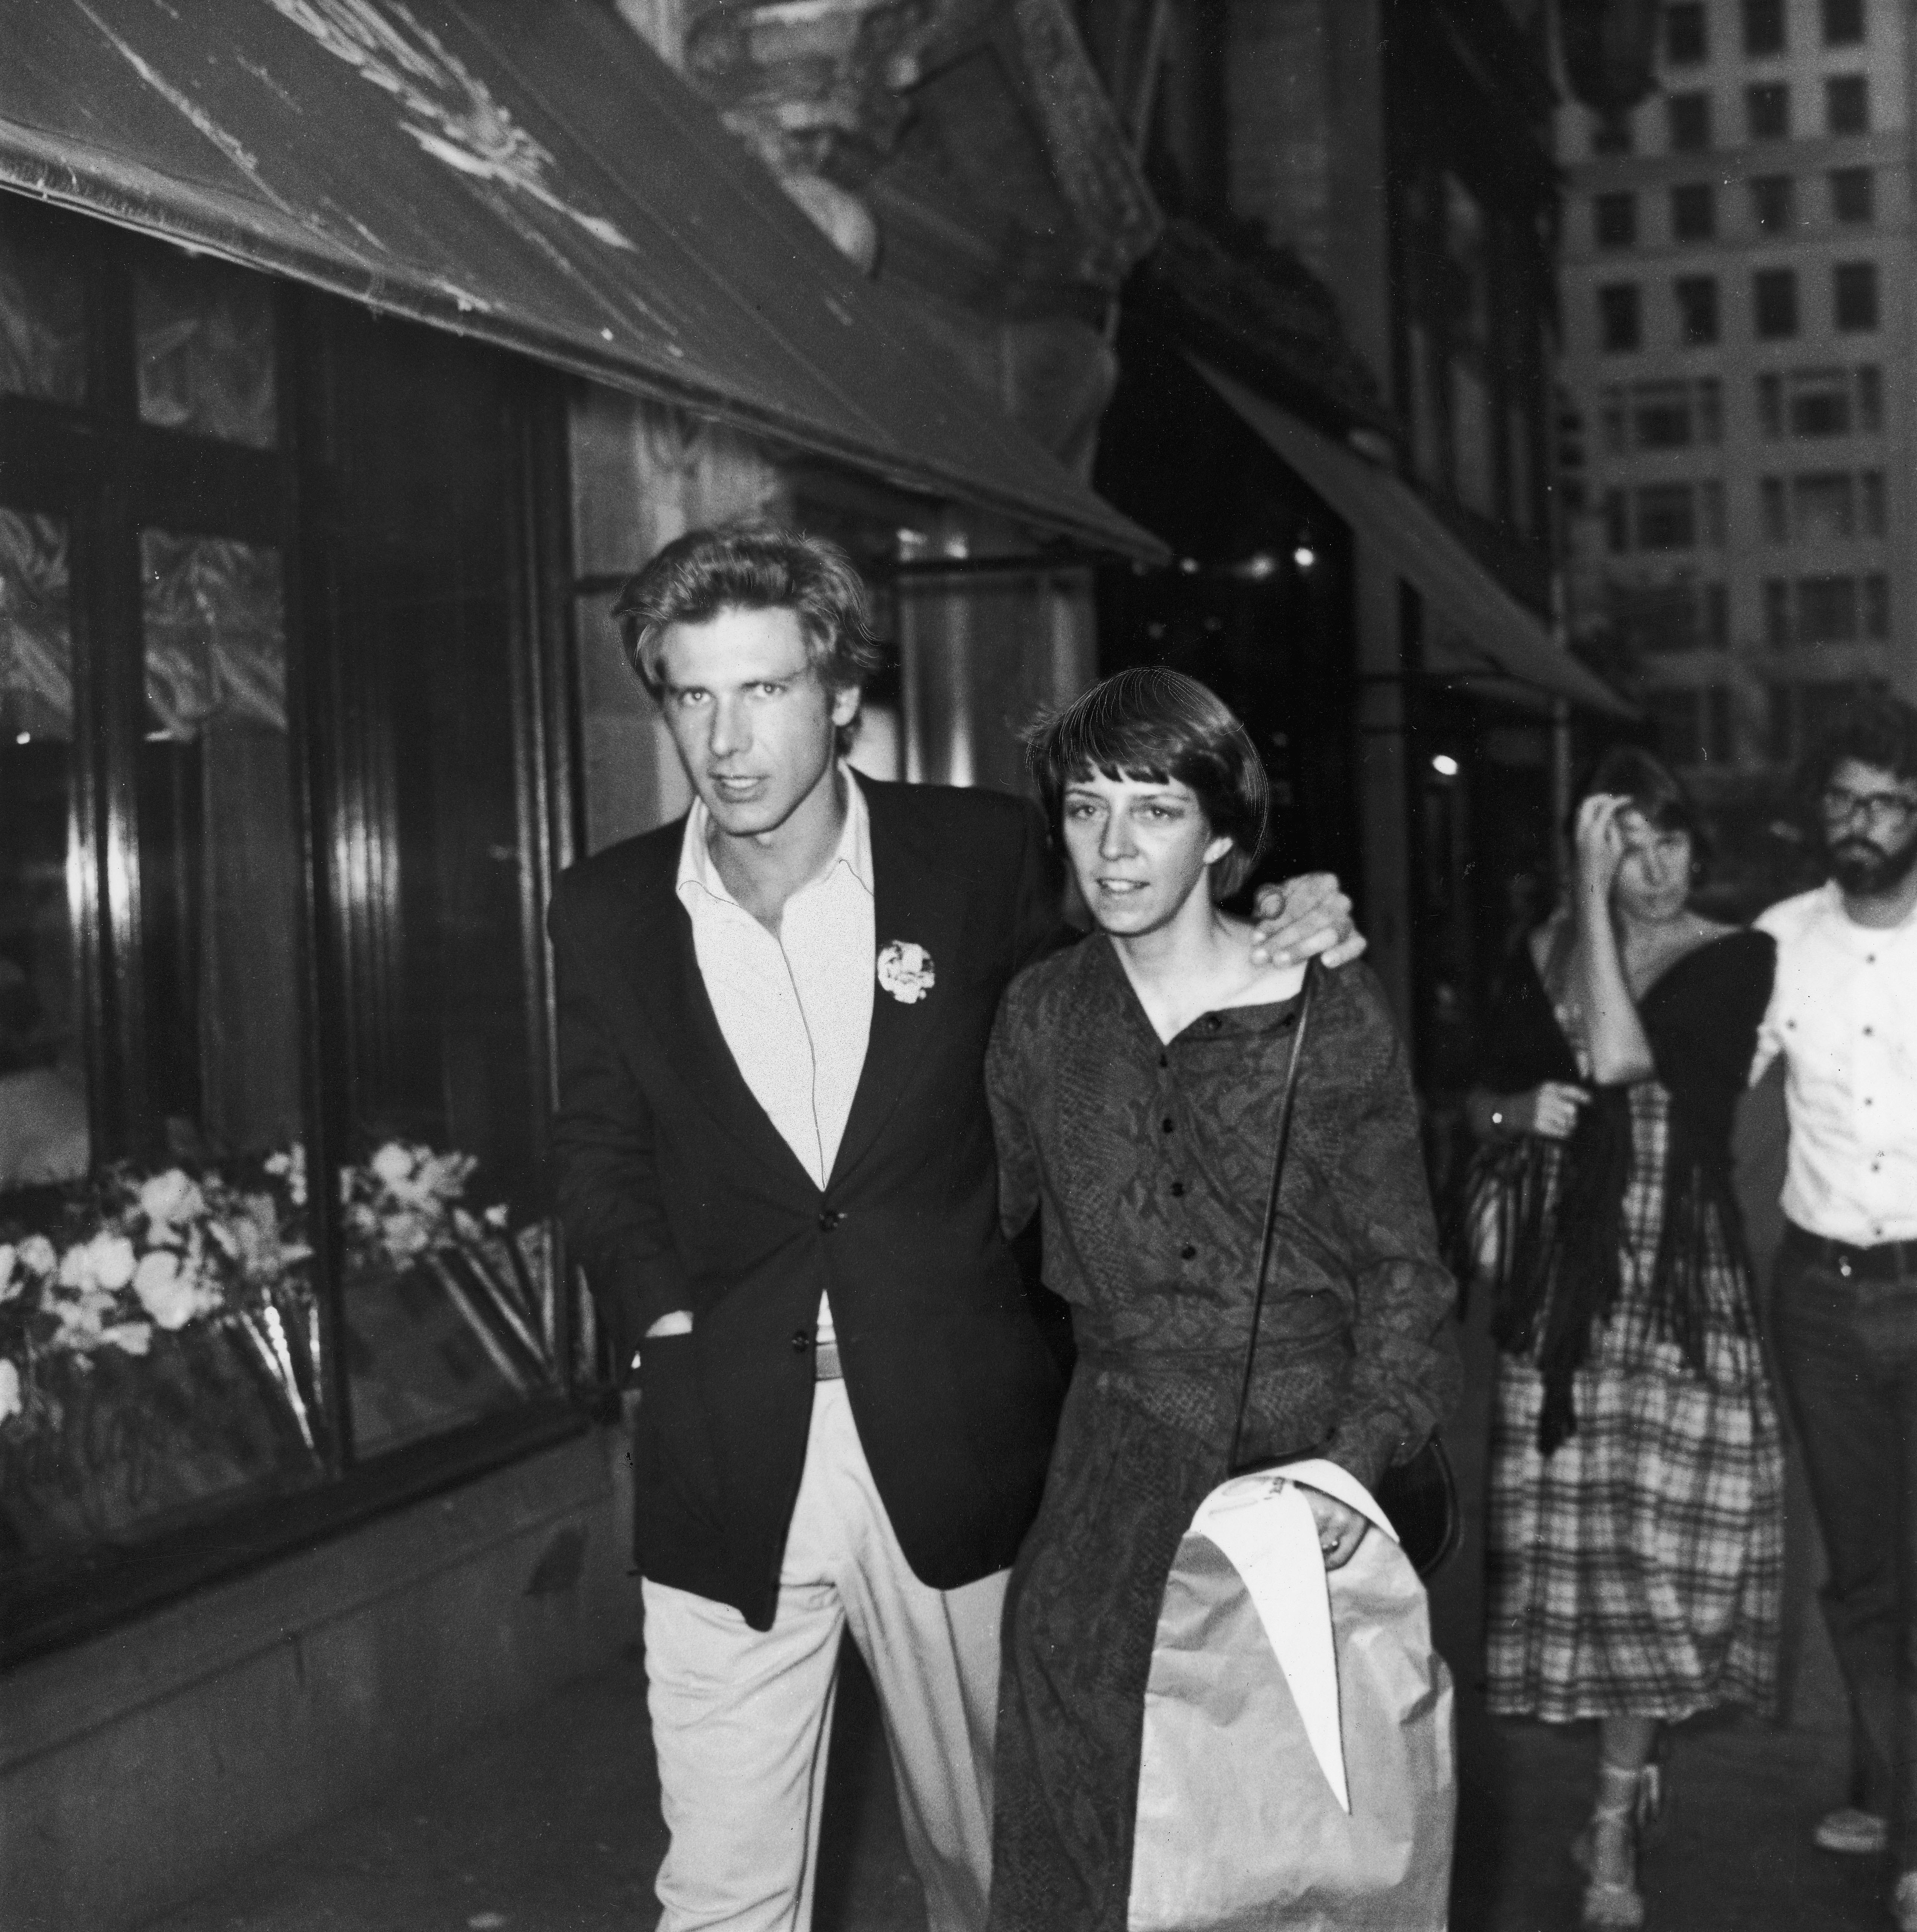 Harrison Ford and Mary Marquardt in New York City in June 1977 | Source: Getty Images